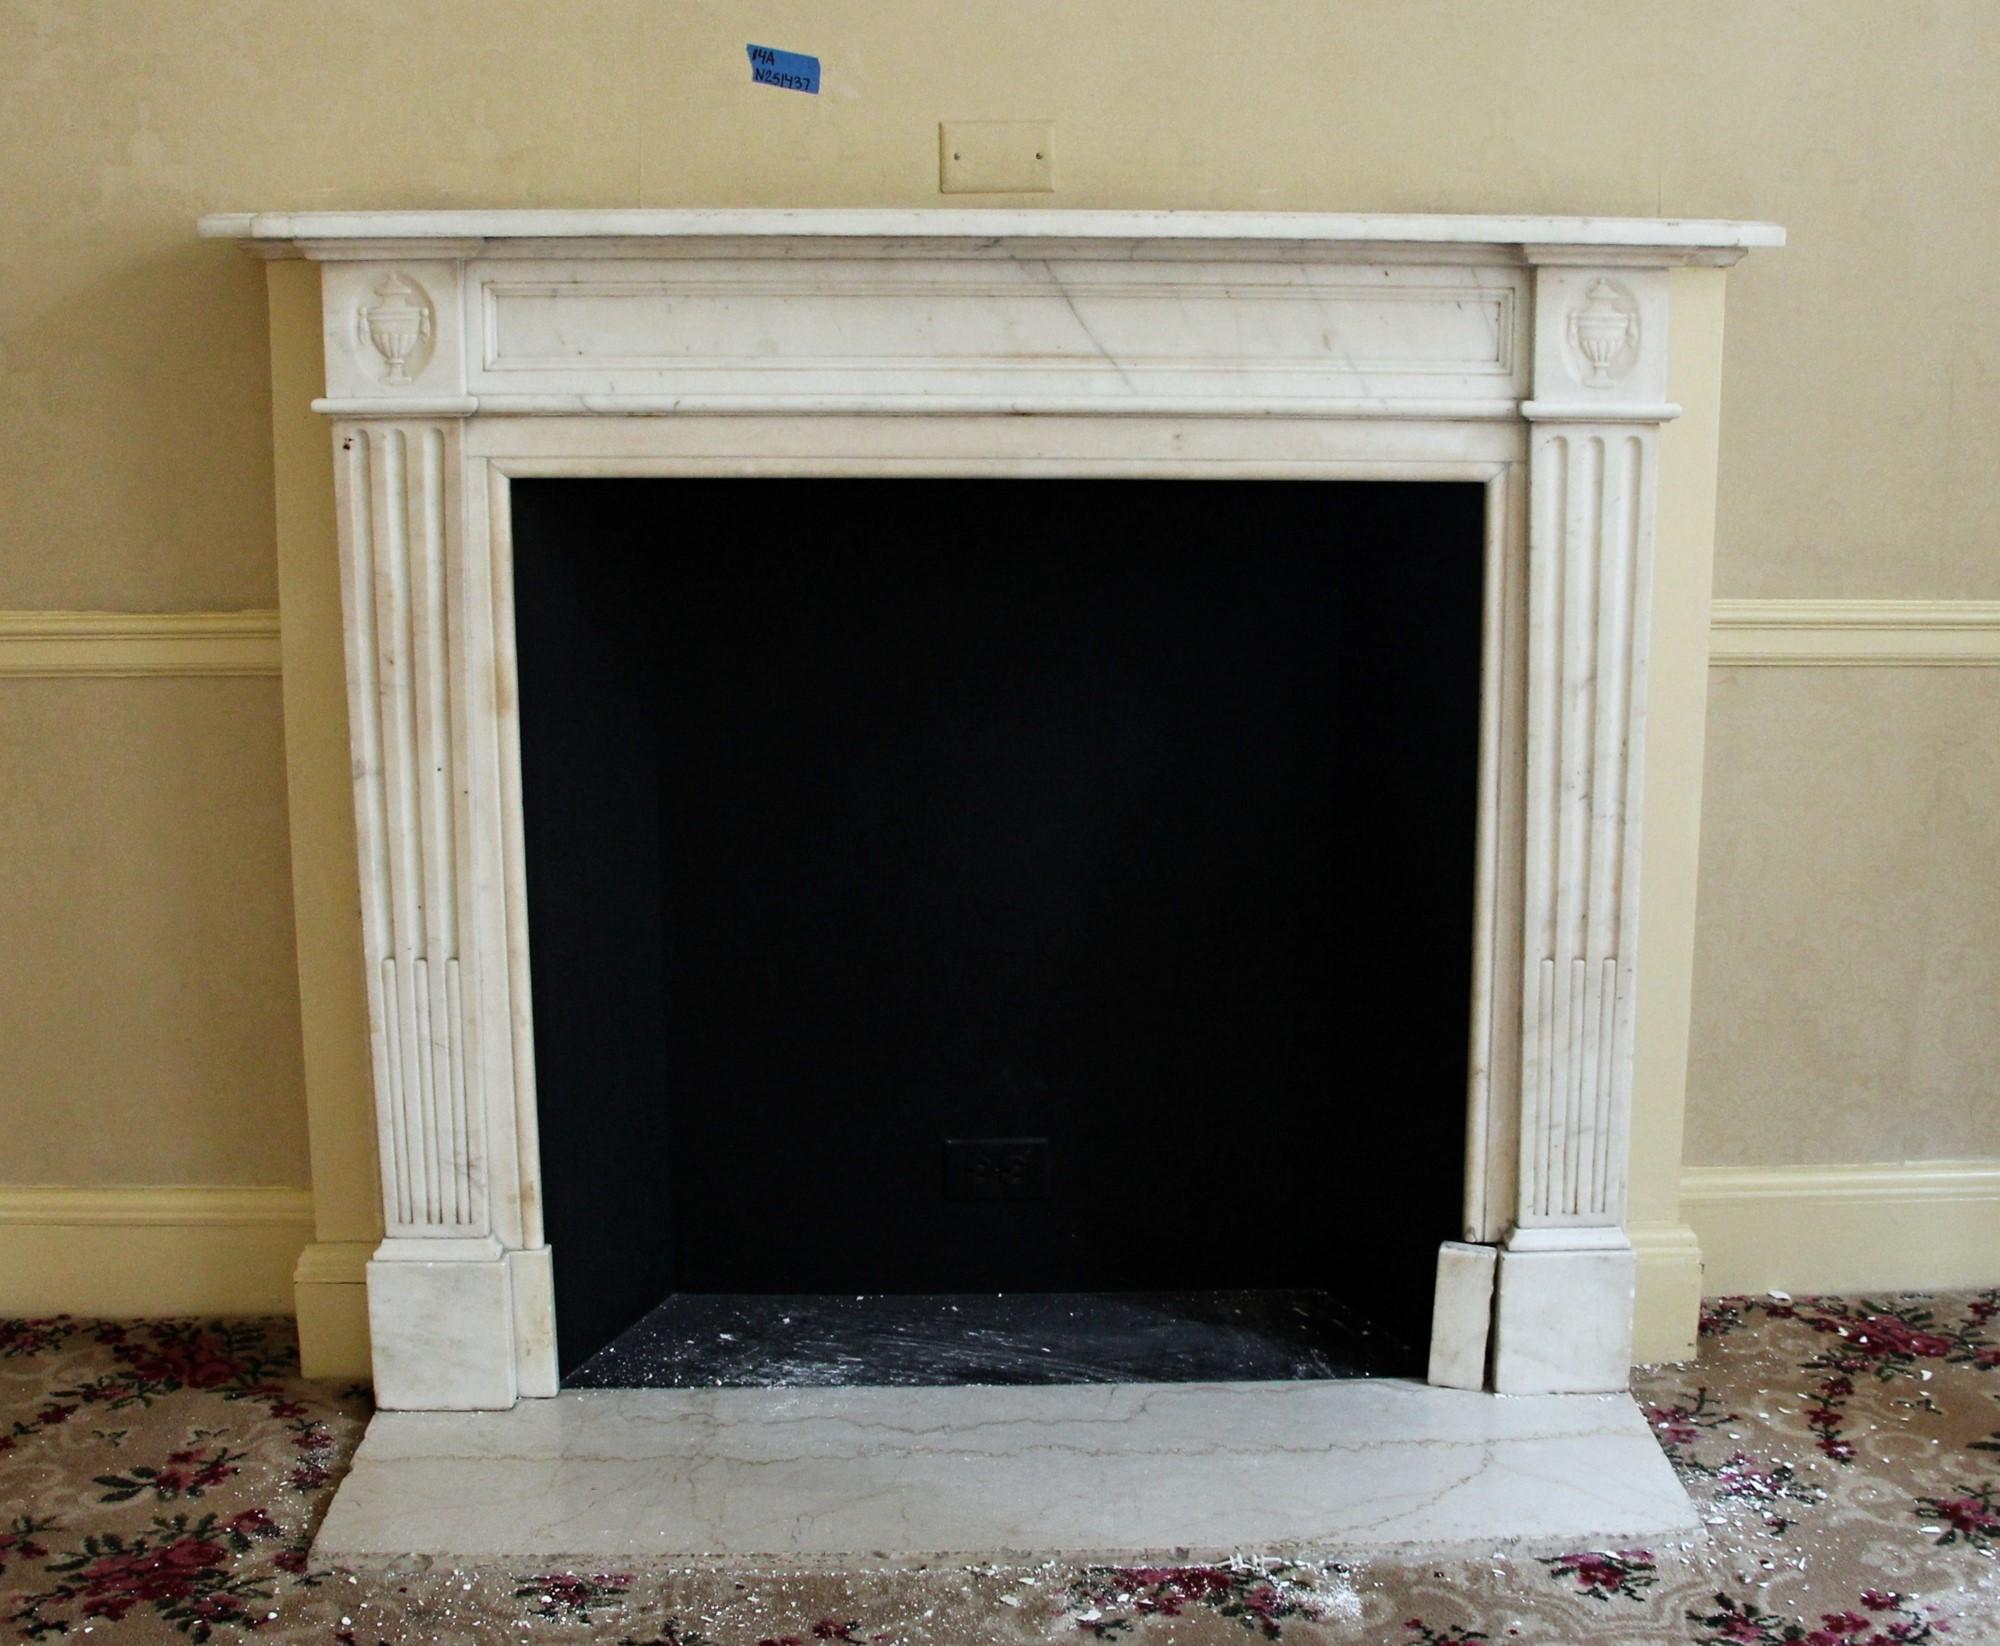 Hearth not included. This is a 19th century English Regency mantel hand carved from white Carrara marble with slight gray veining. Features hand carved urn detail on the top plinths. This mantel was one of a group of antique mantels imported from